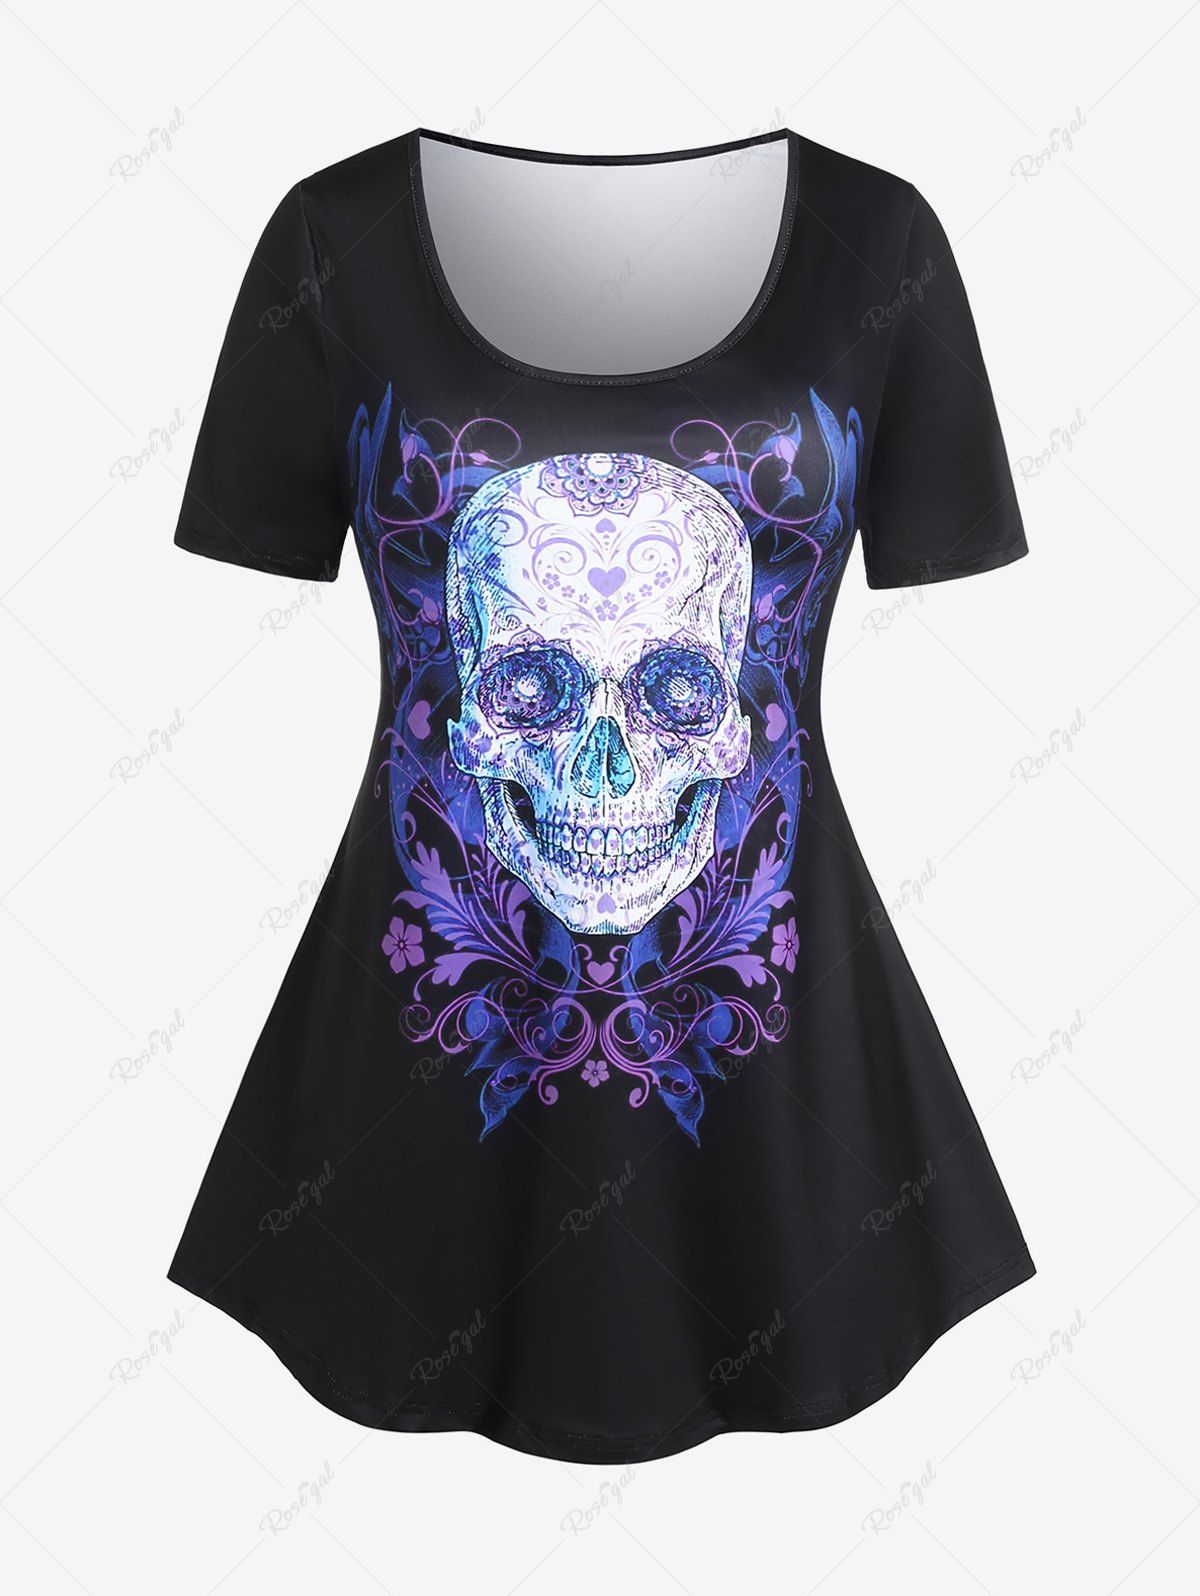 New Plus Size Skull Printed Short Sleeves Gothic Tee  